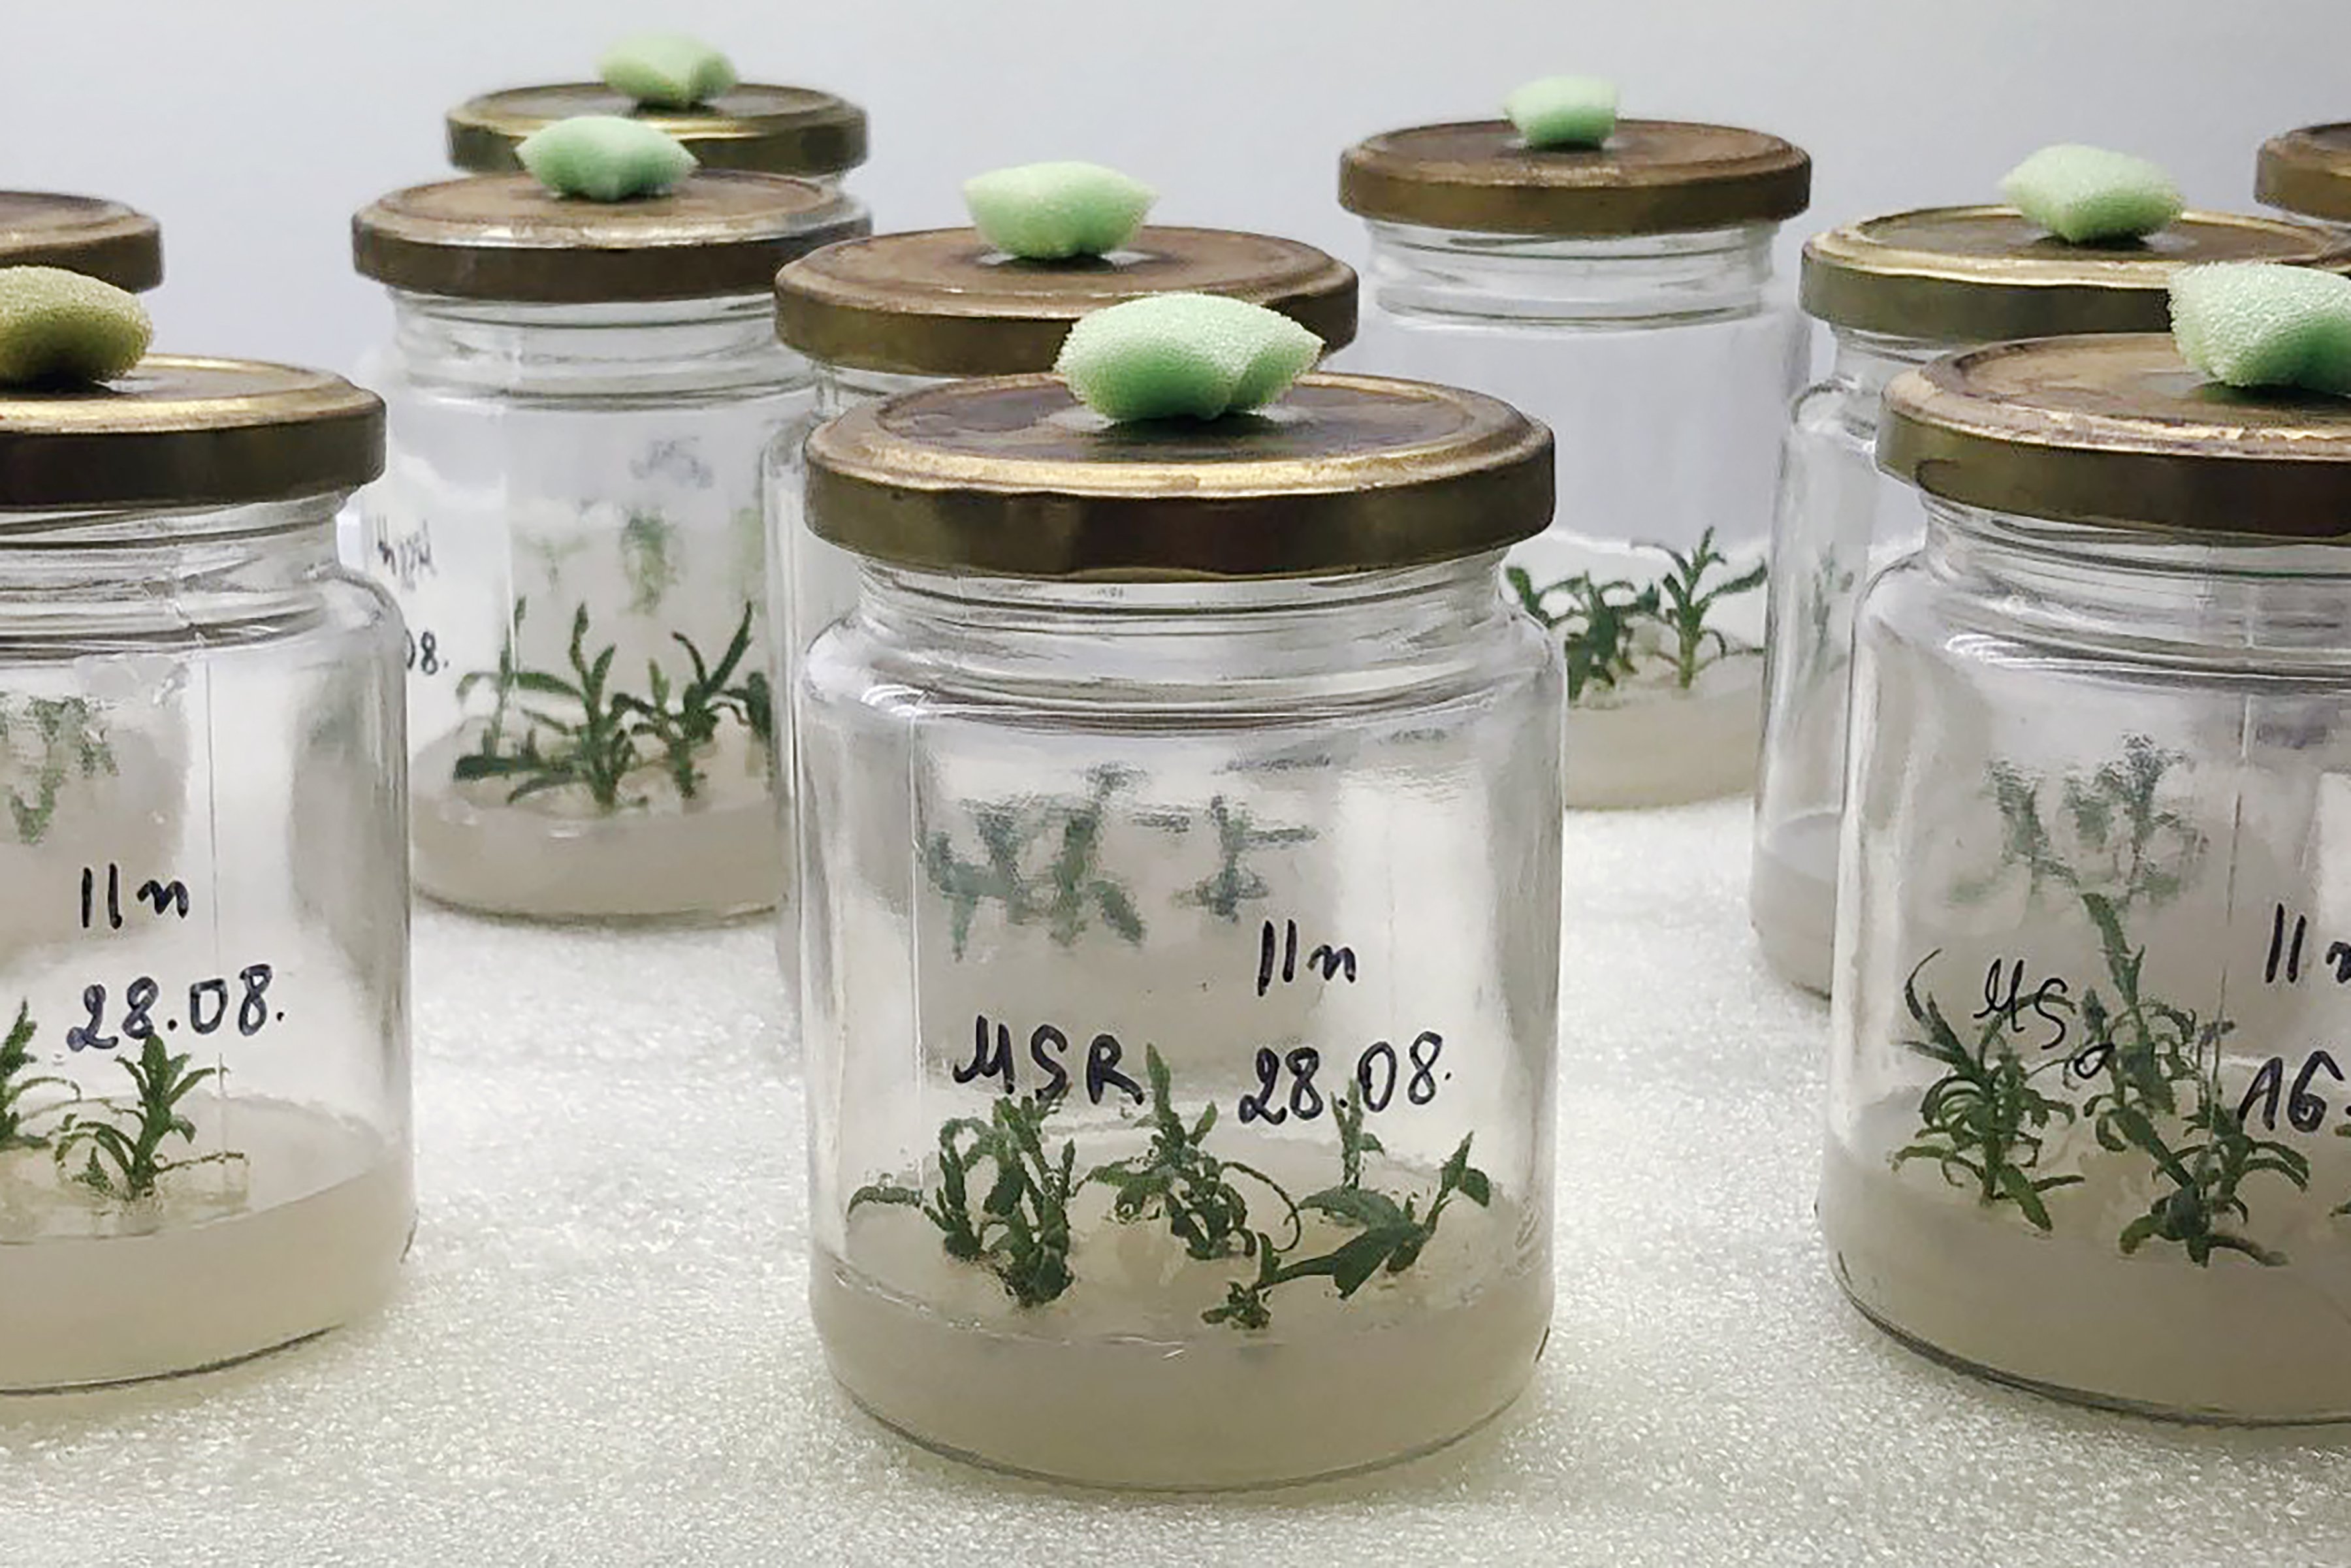 Small clear glass jars with plants beginning to sprout in them with writing on jars. 